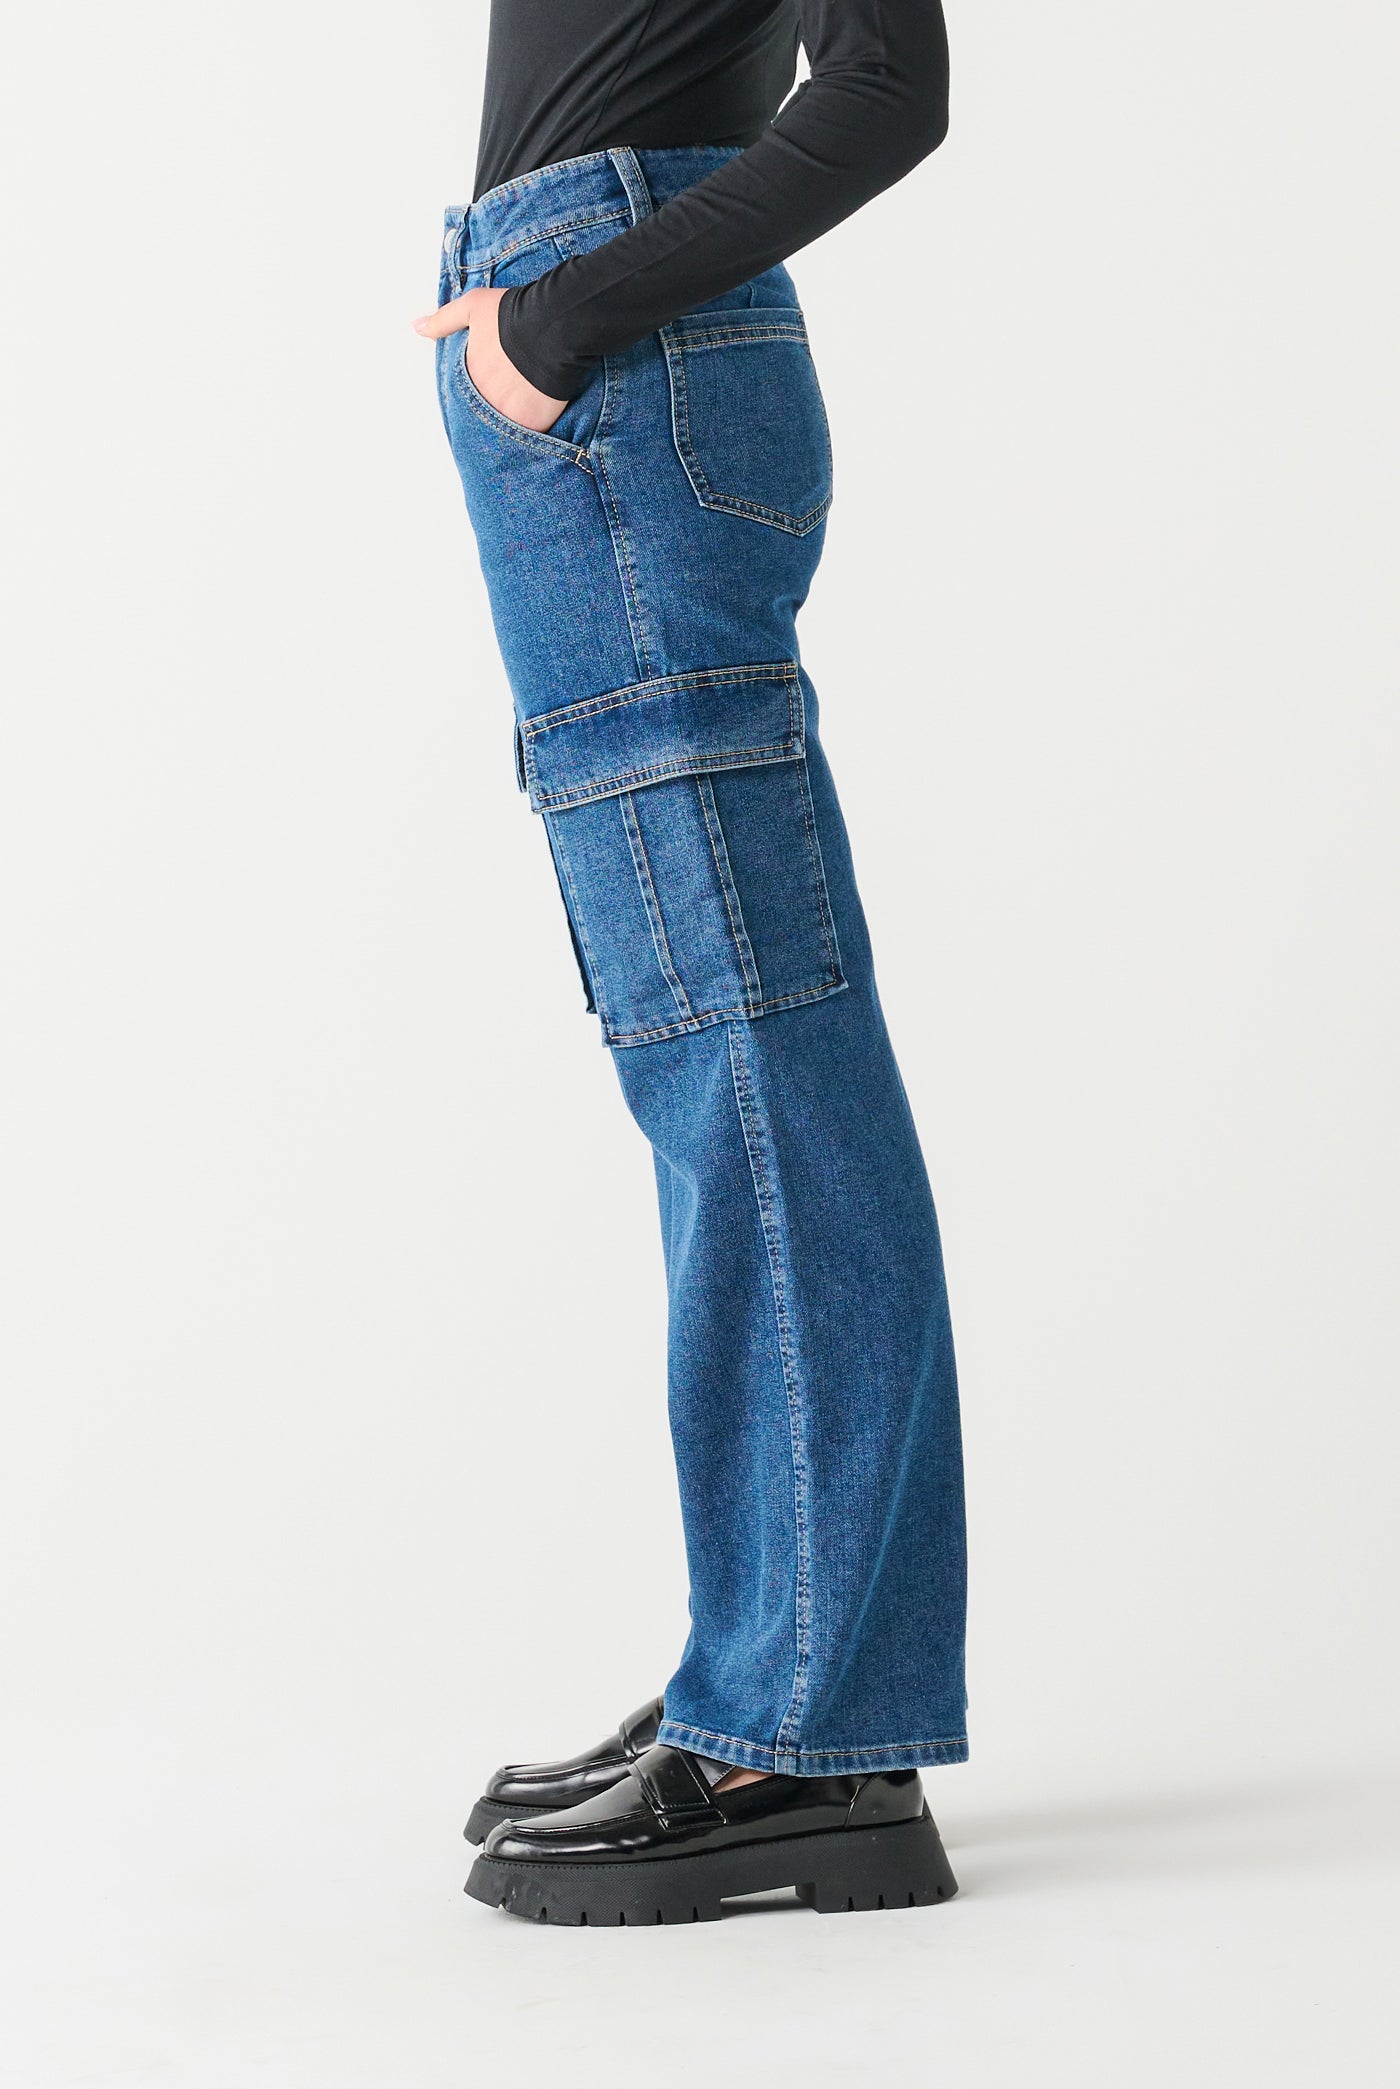 Pier 54 Cargo Jeans-Denim-Vixen Collection, Day Spa and Women's Boutique Located in Seattle, Washington